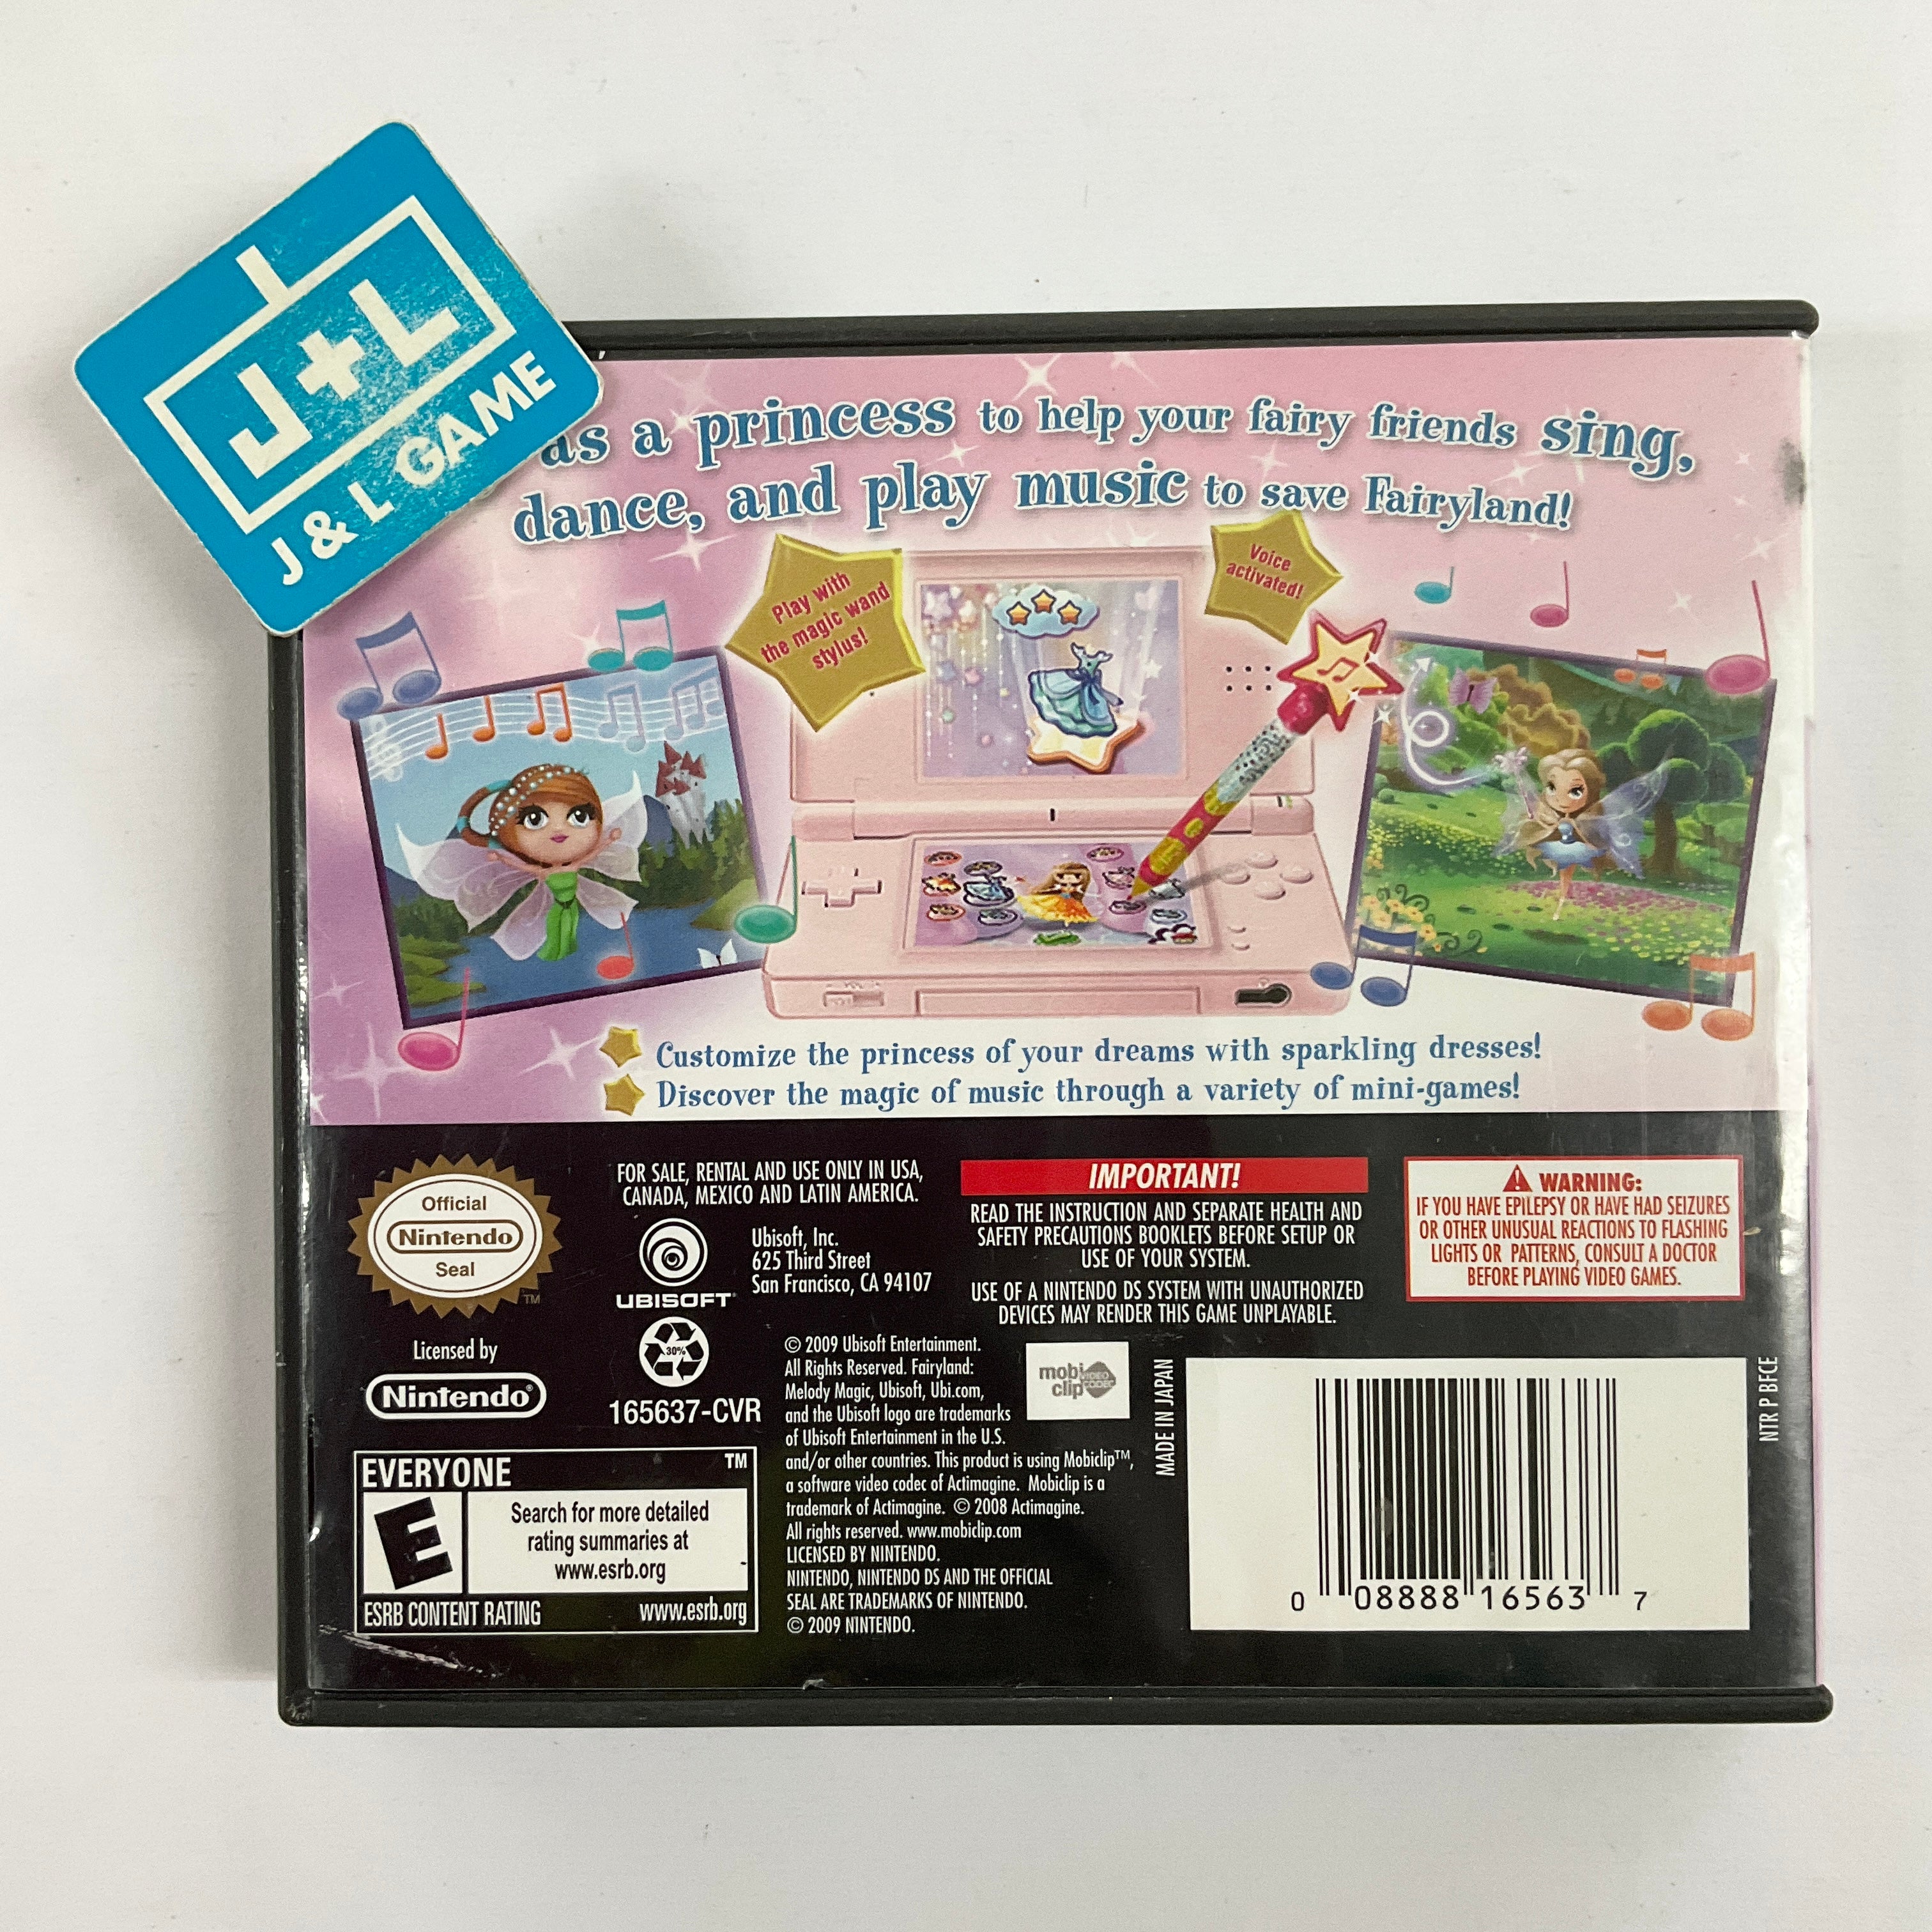 Fairyland Melody Magic - (NDS) Nintendo DS [Pre-Owned] Video Games Ubisoft   